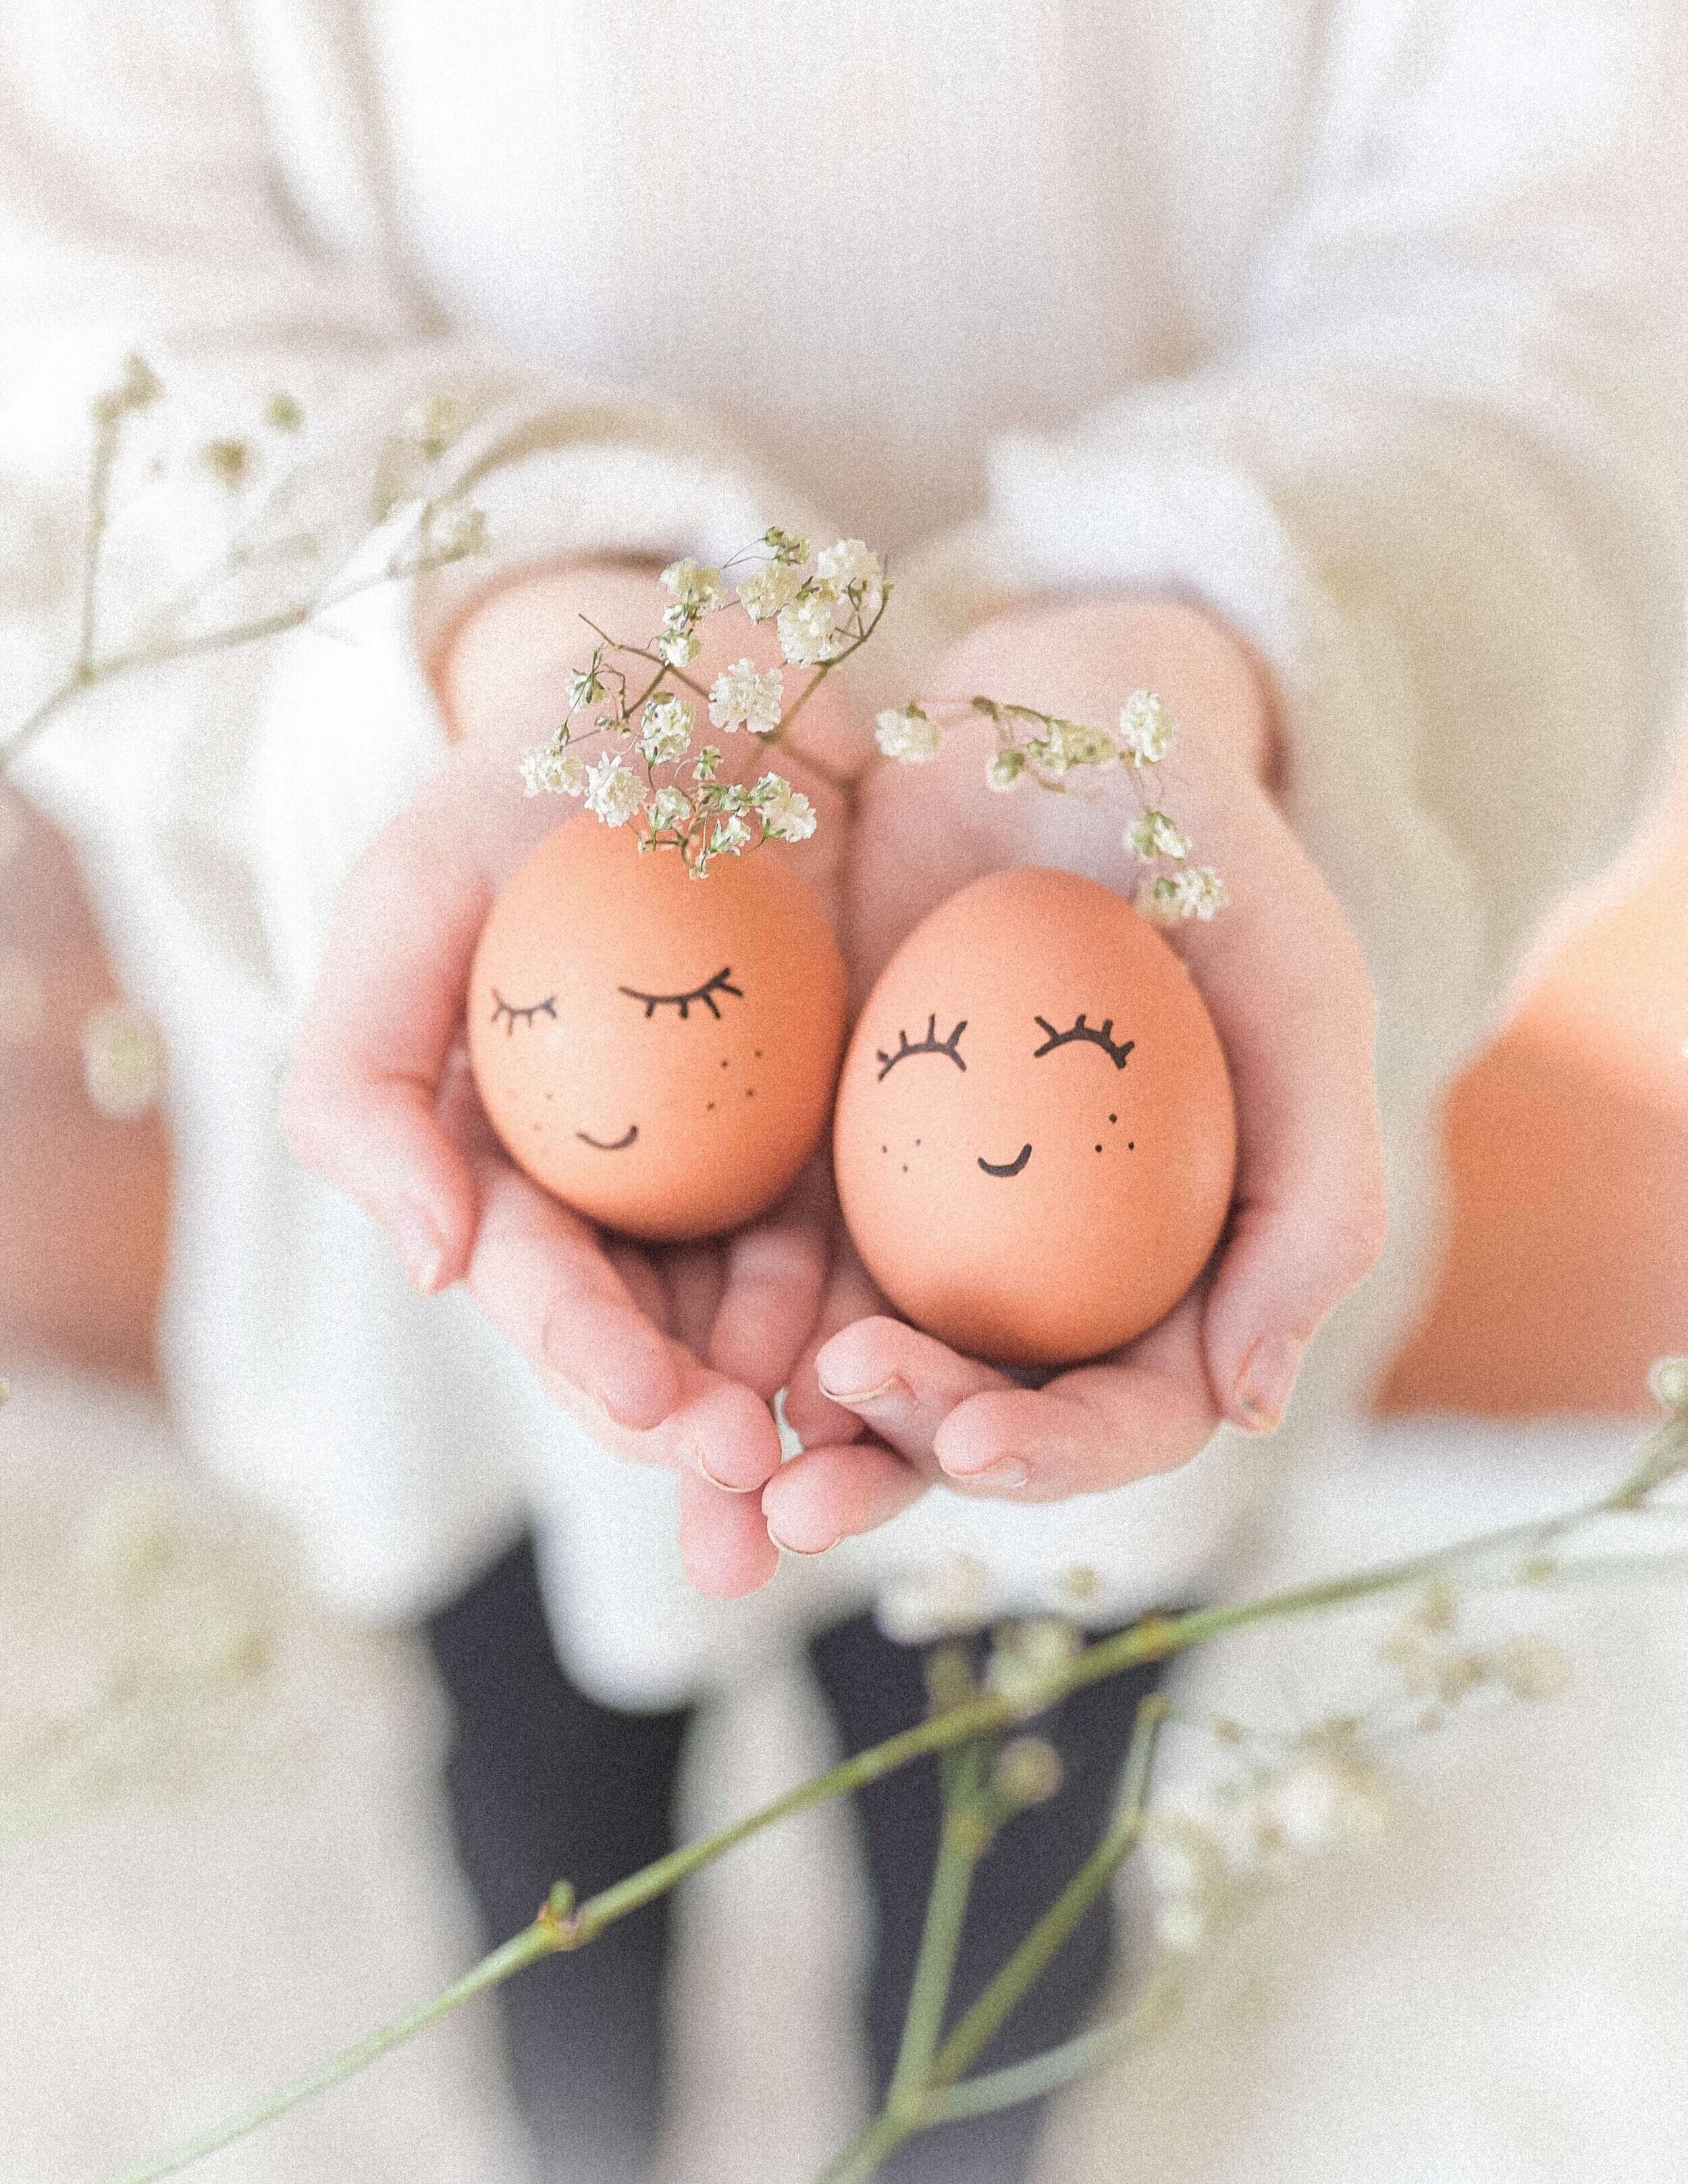 woman holding two eggs with smiley faces drawn on them